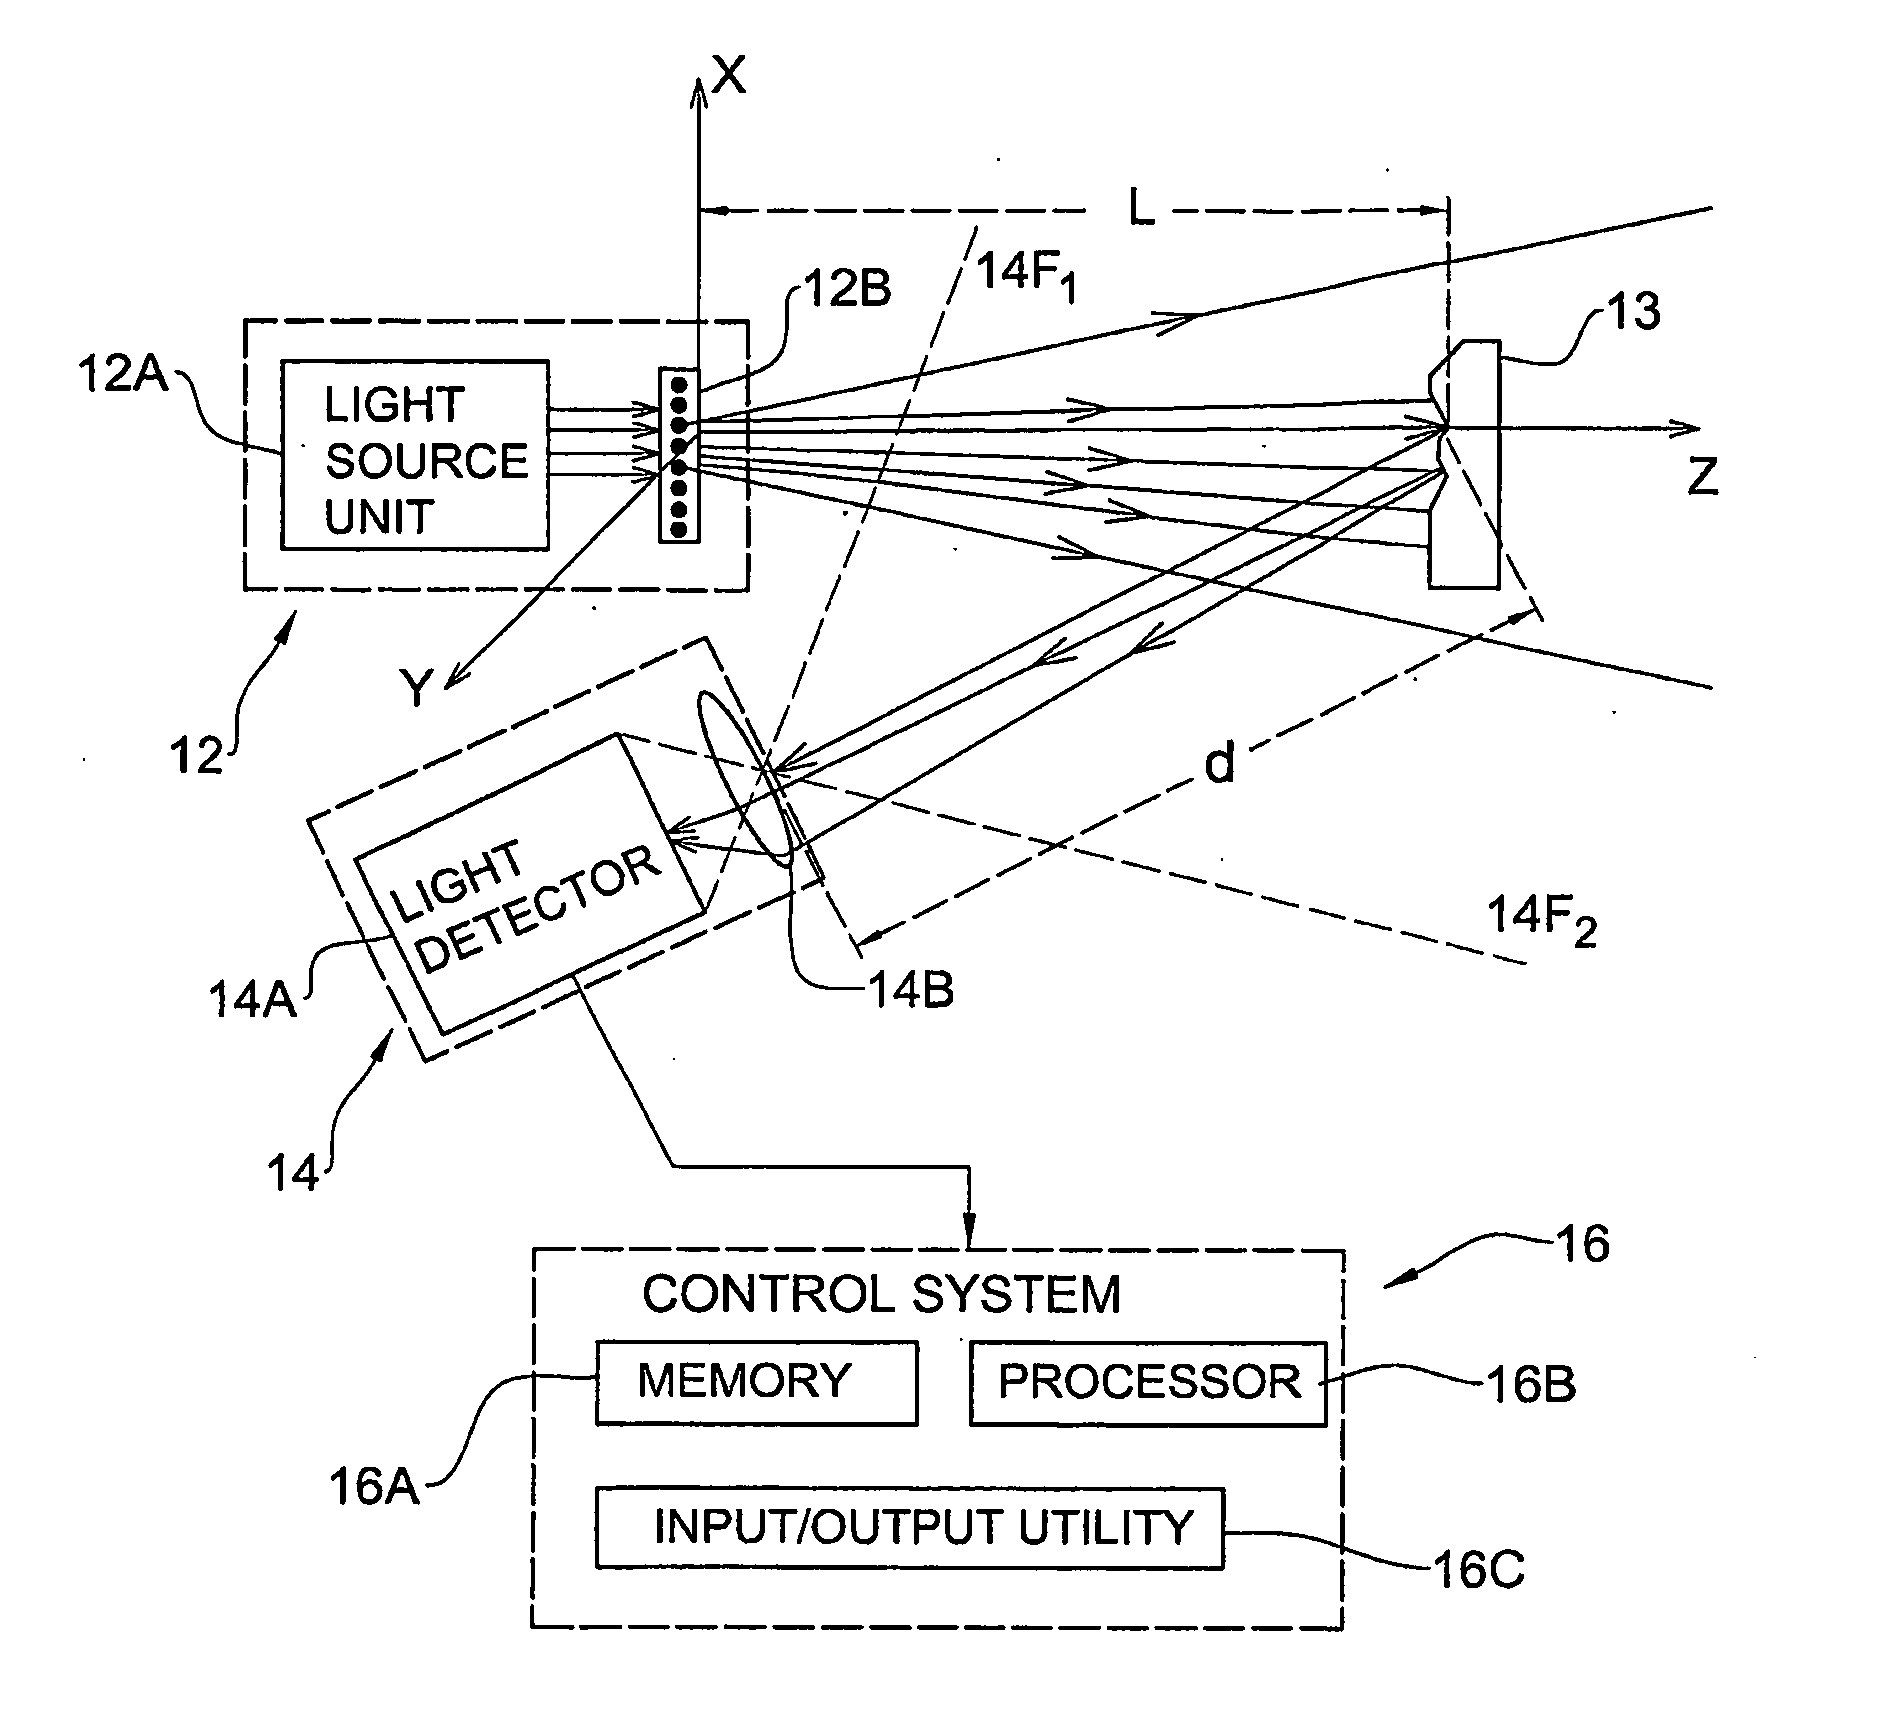 Method and System for Object Reconstruction